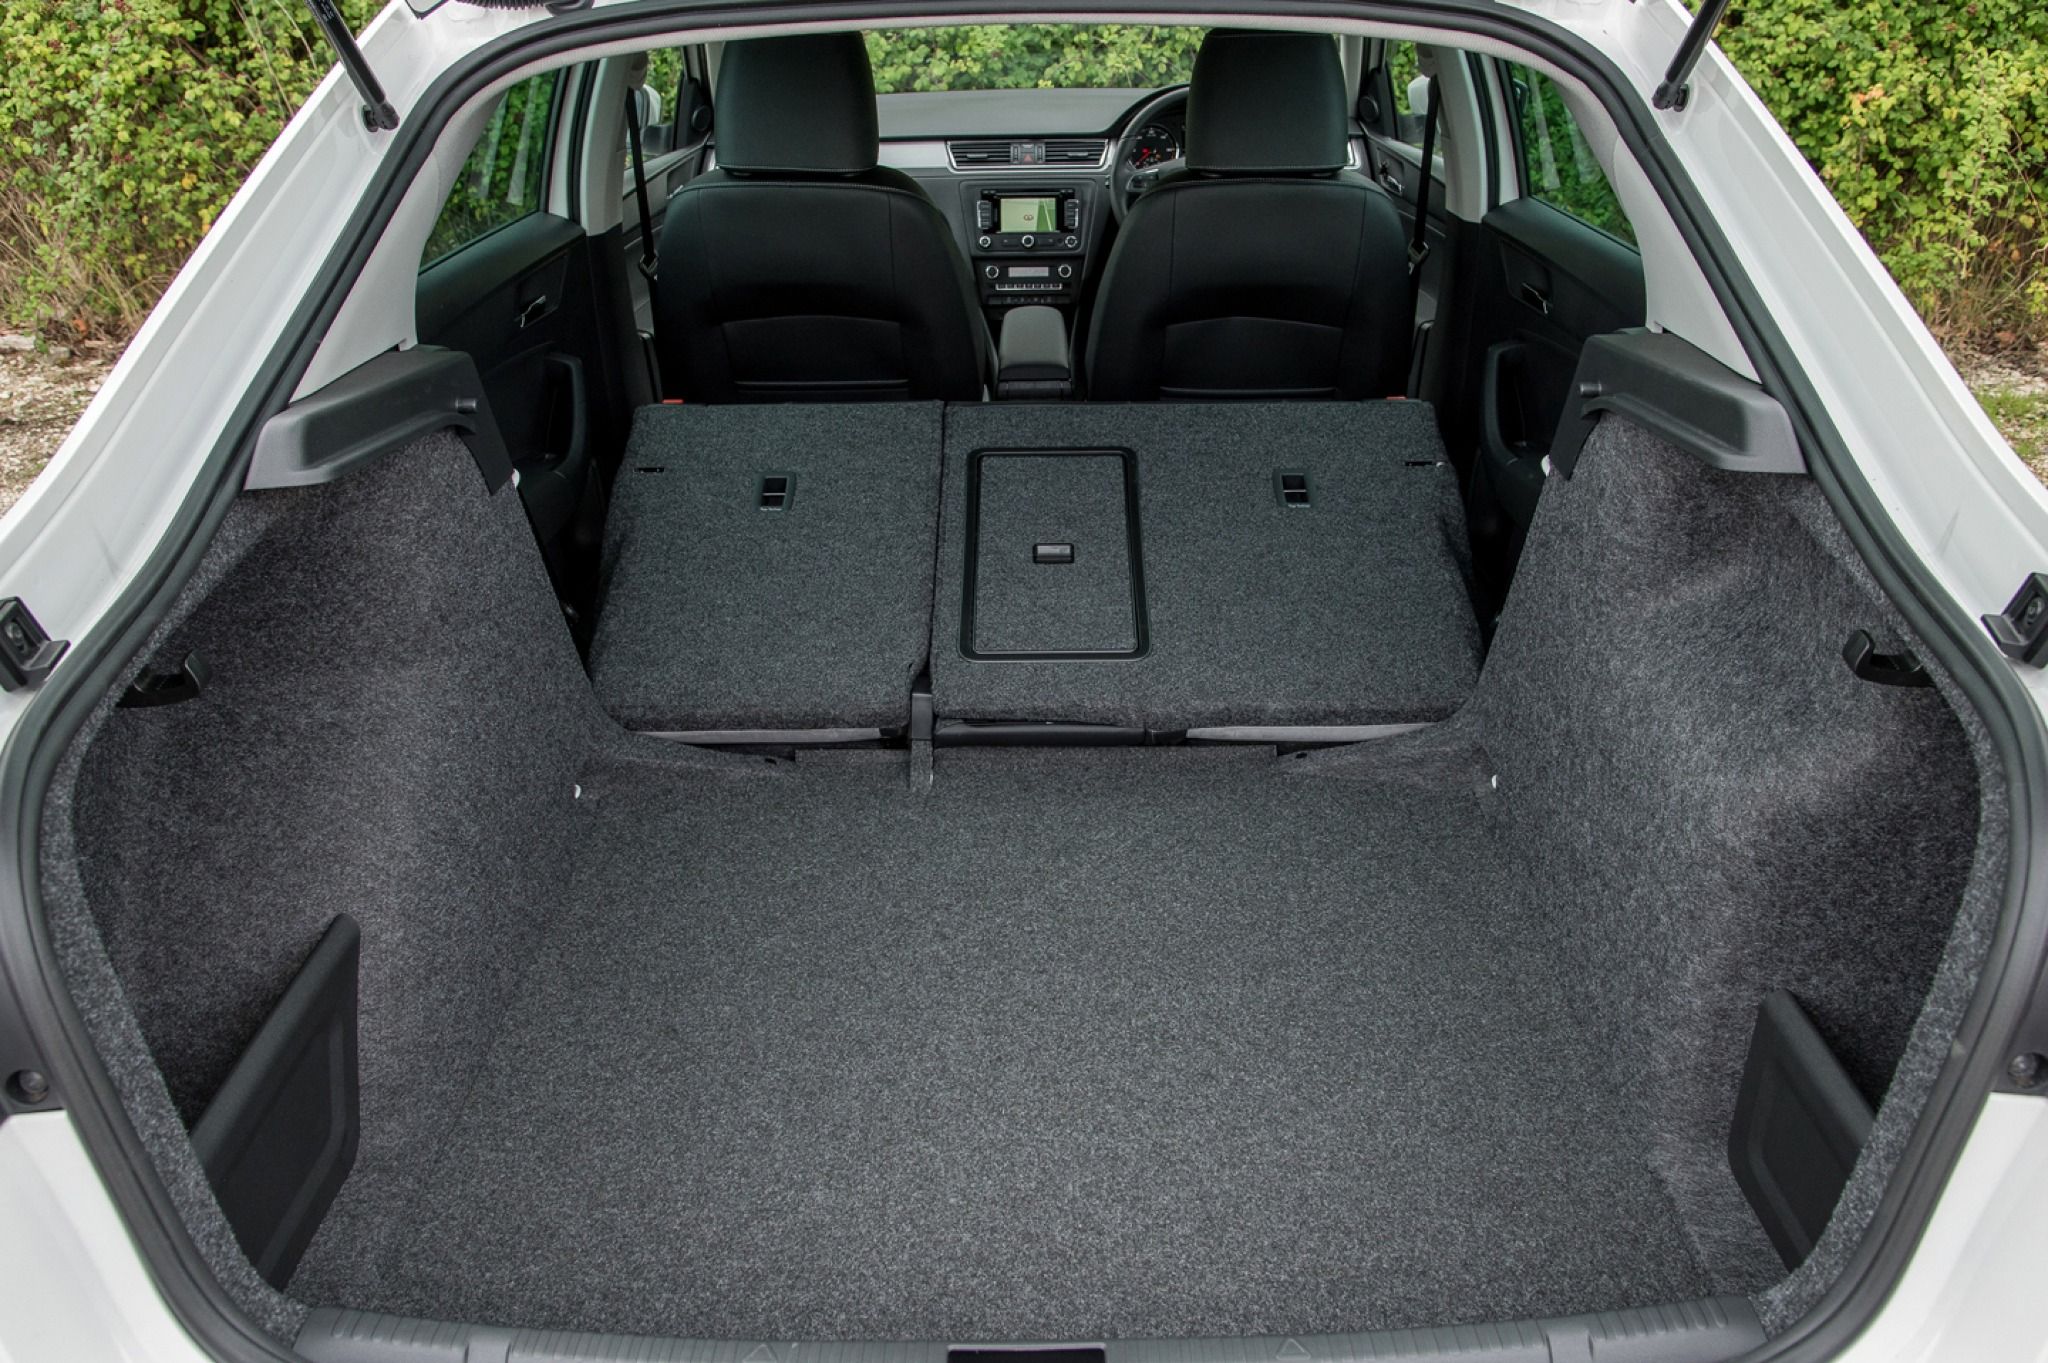 Boot space of a SEAT Toledo